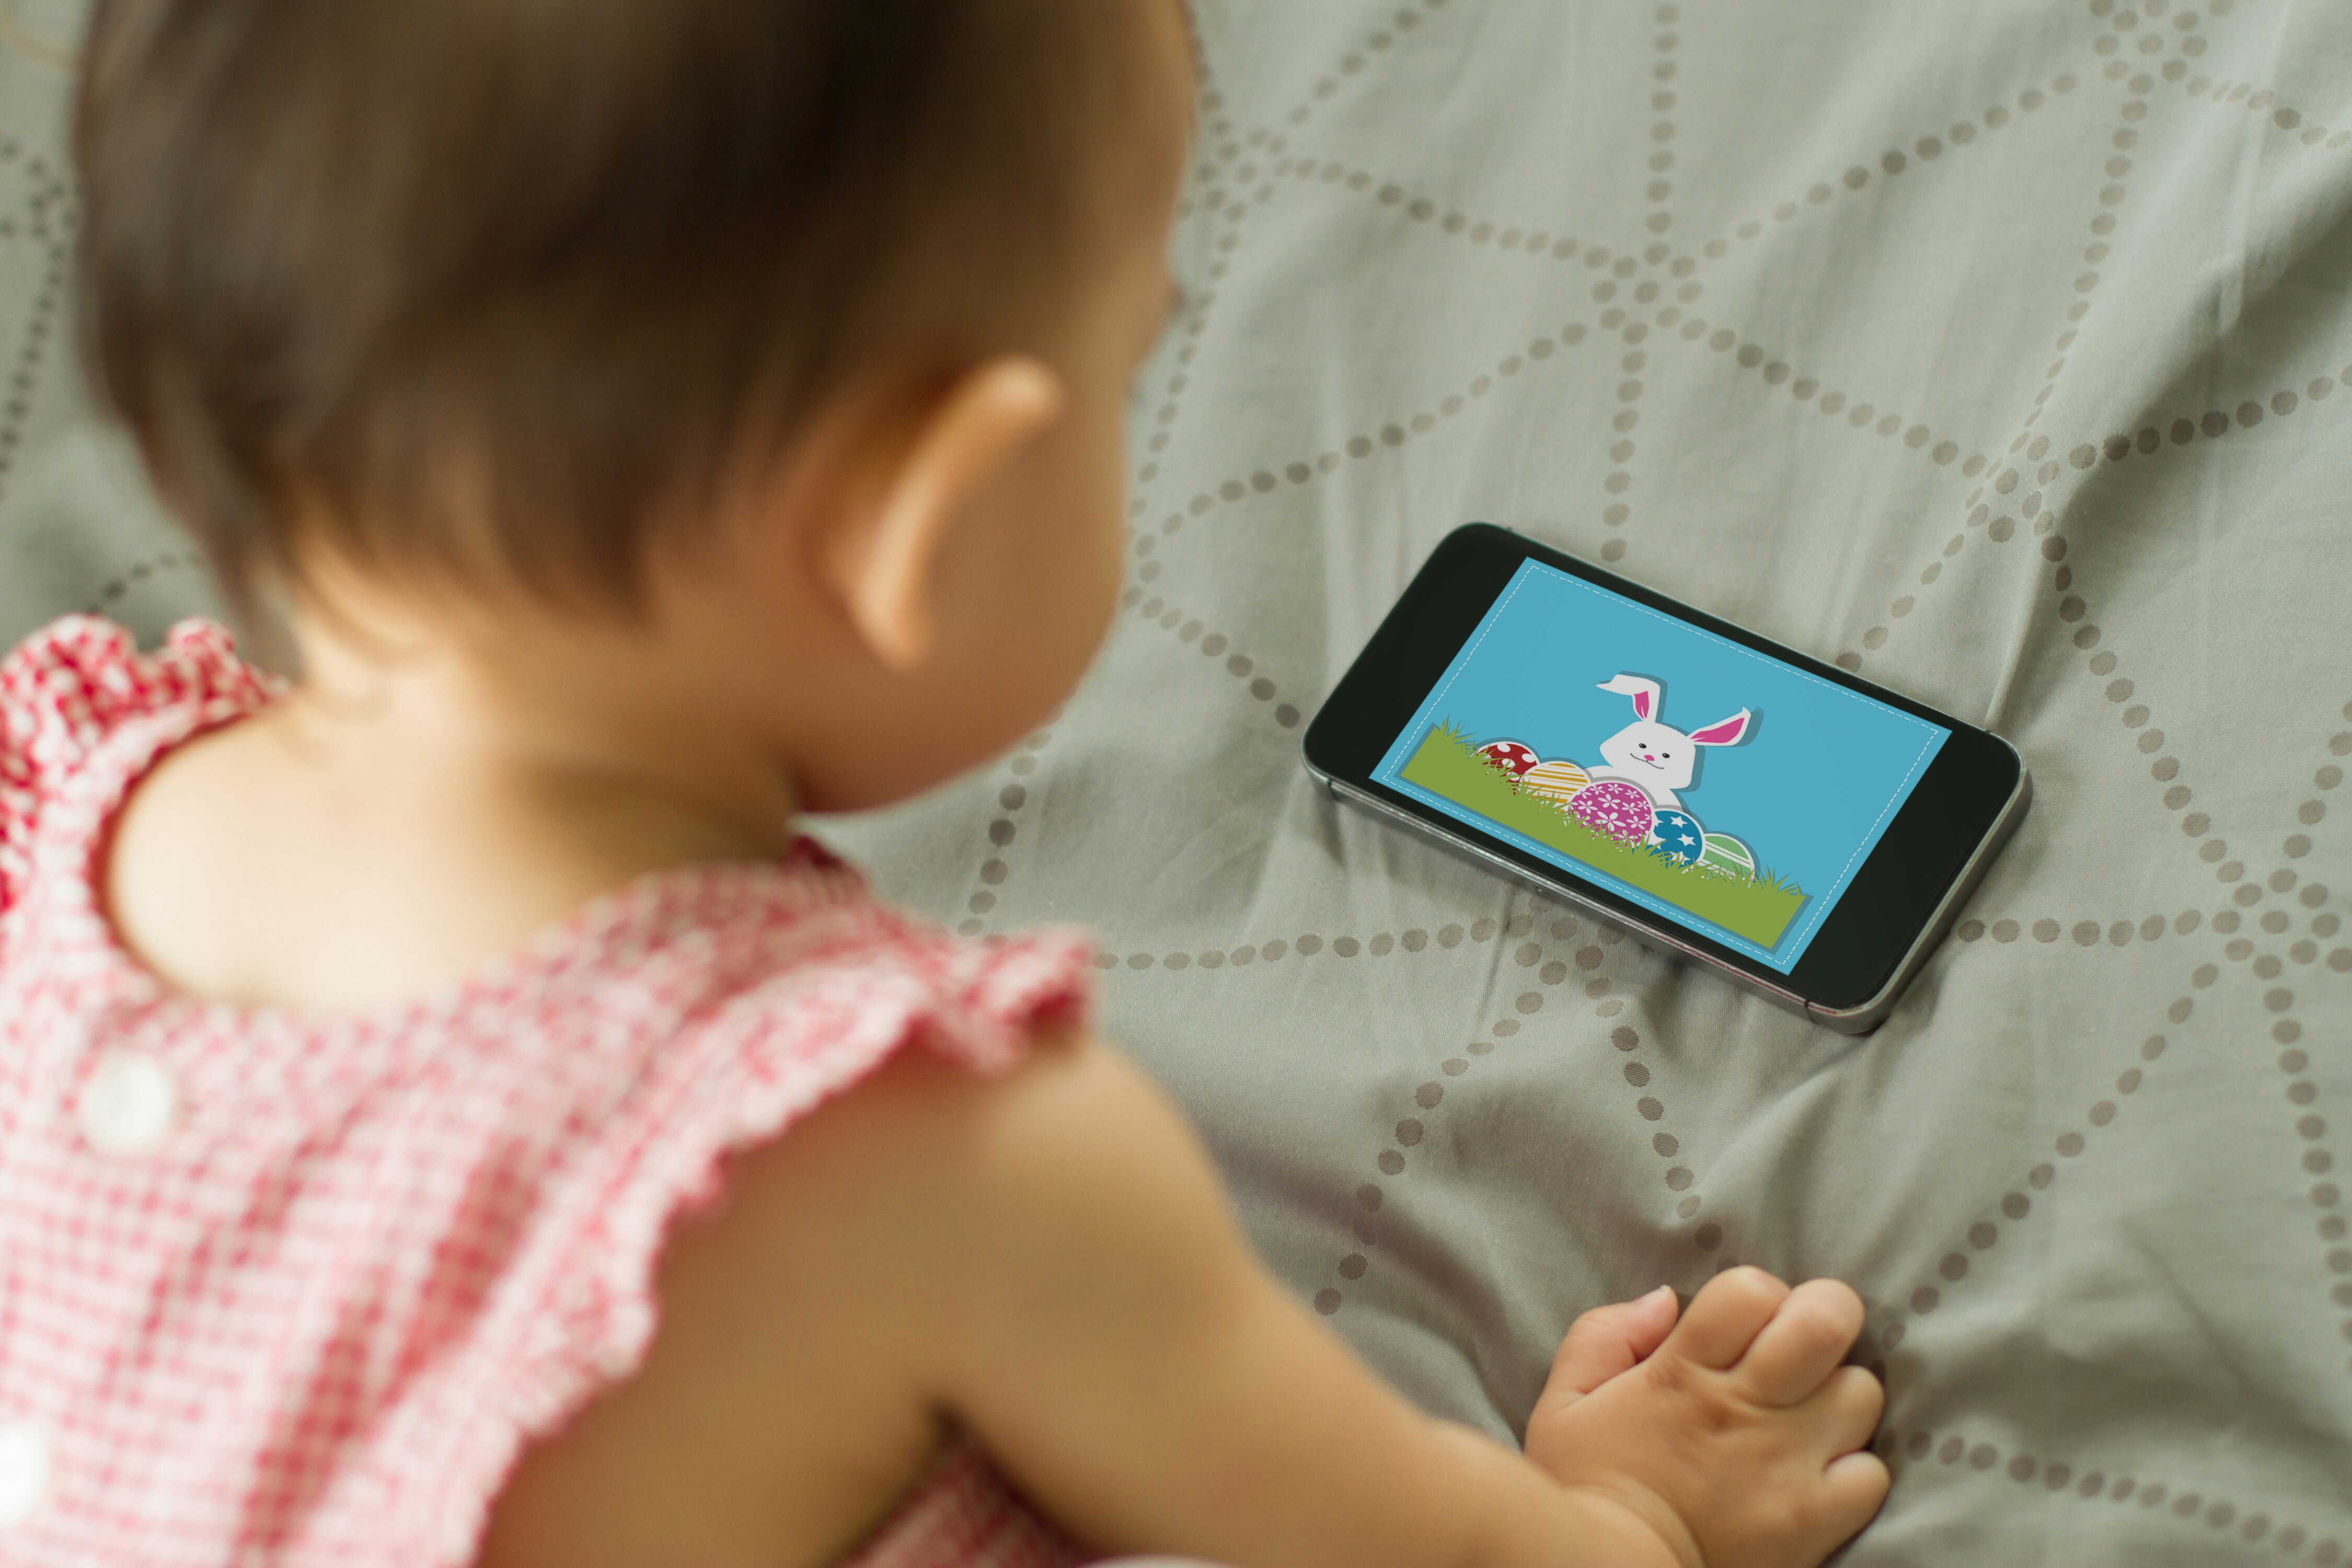 Baby looking at a colourful picture on a mobile phone screen.